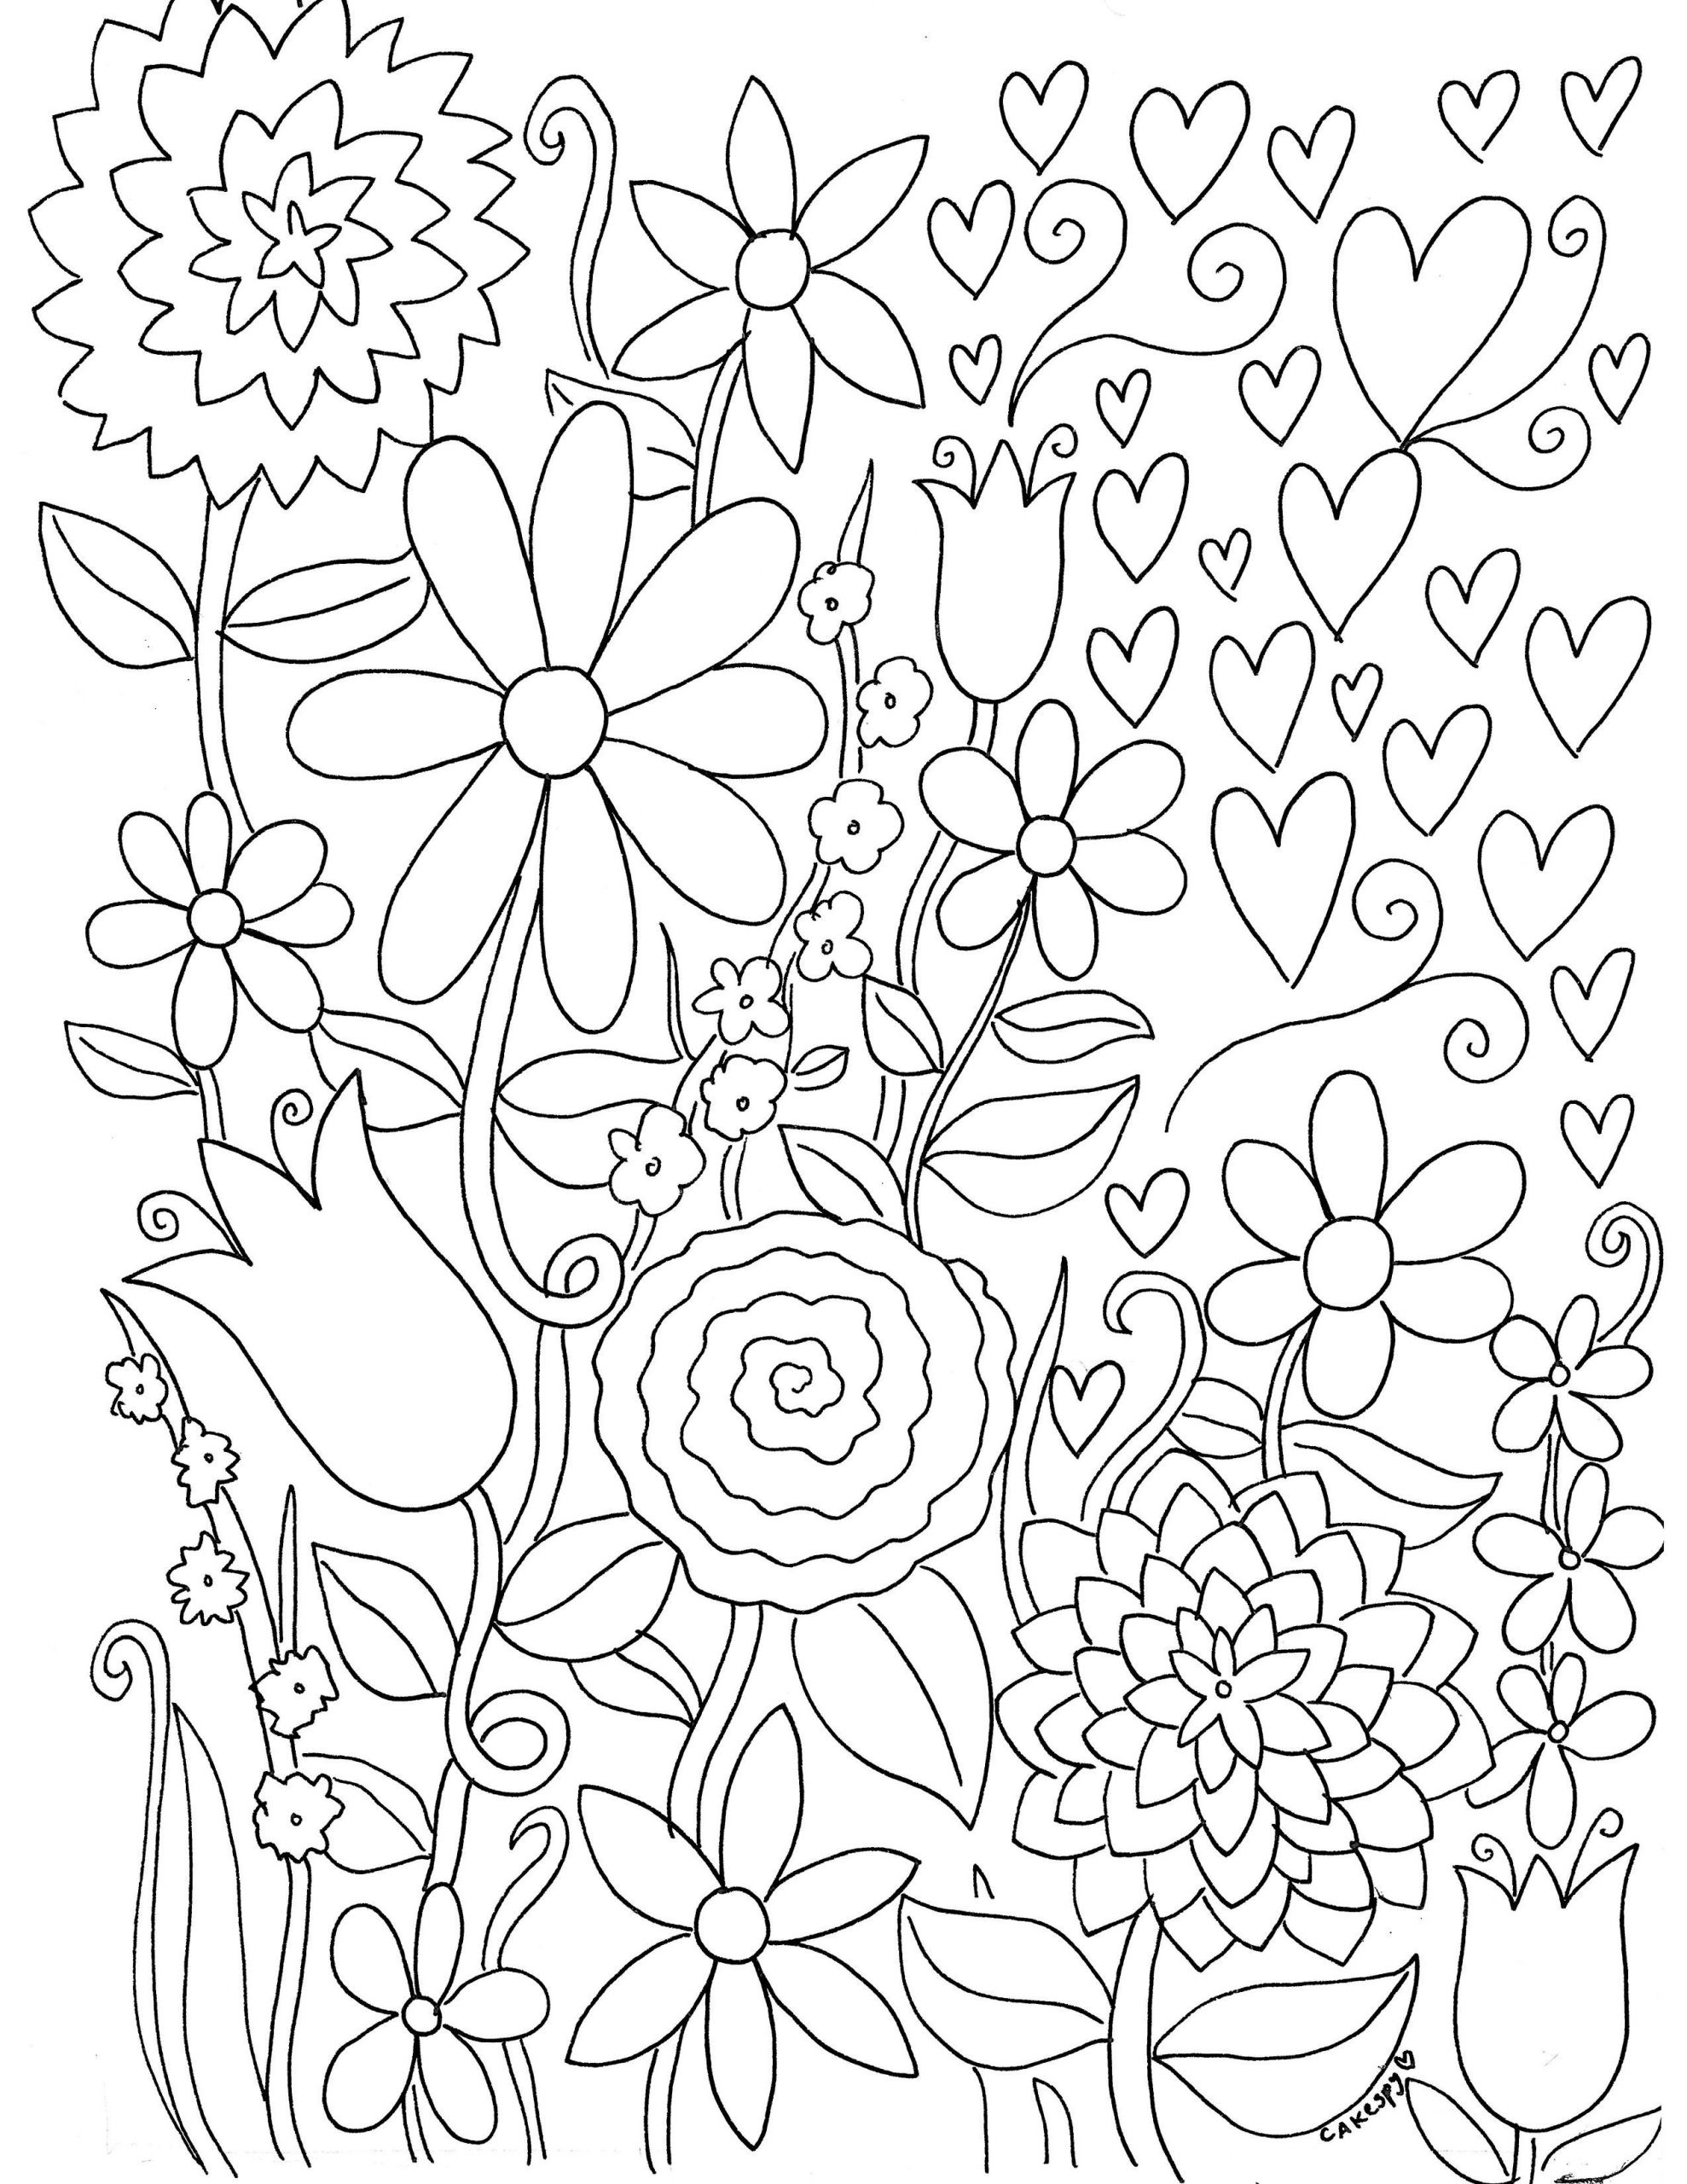 Adult Coloring Book Download
 FREE Paint by Numbers for Adults Downloadable